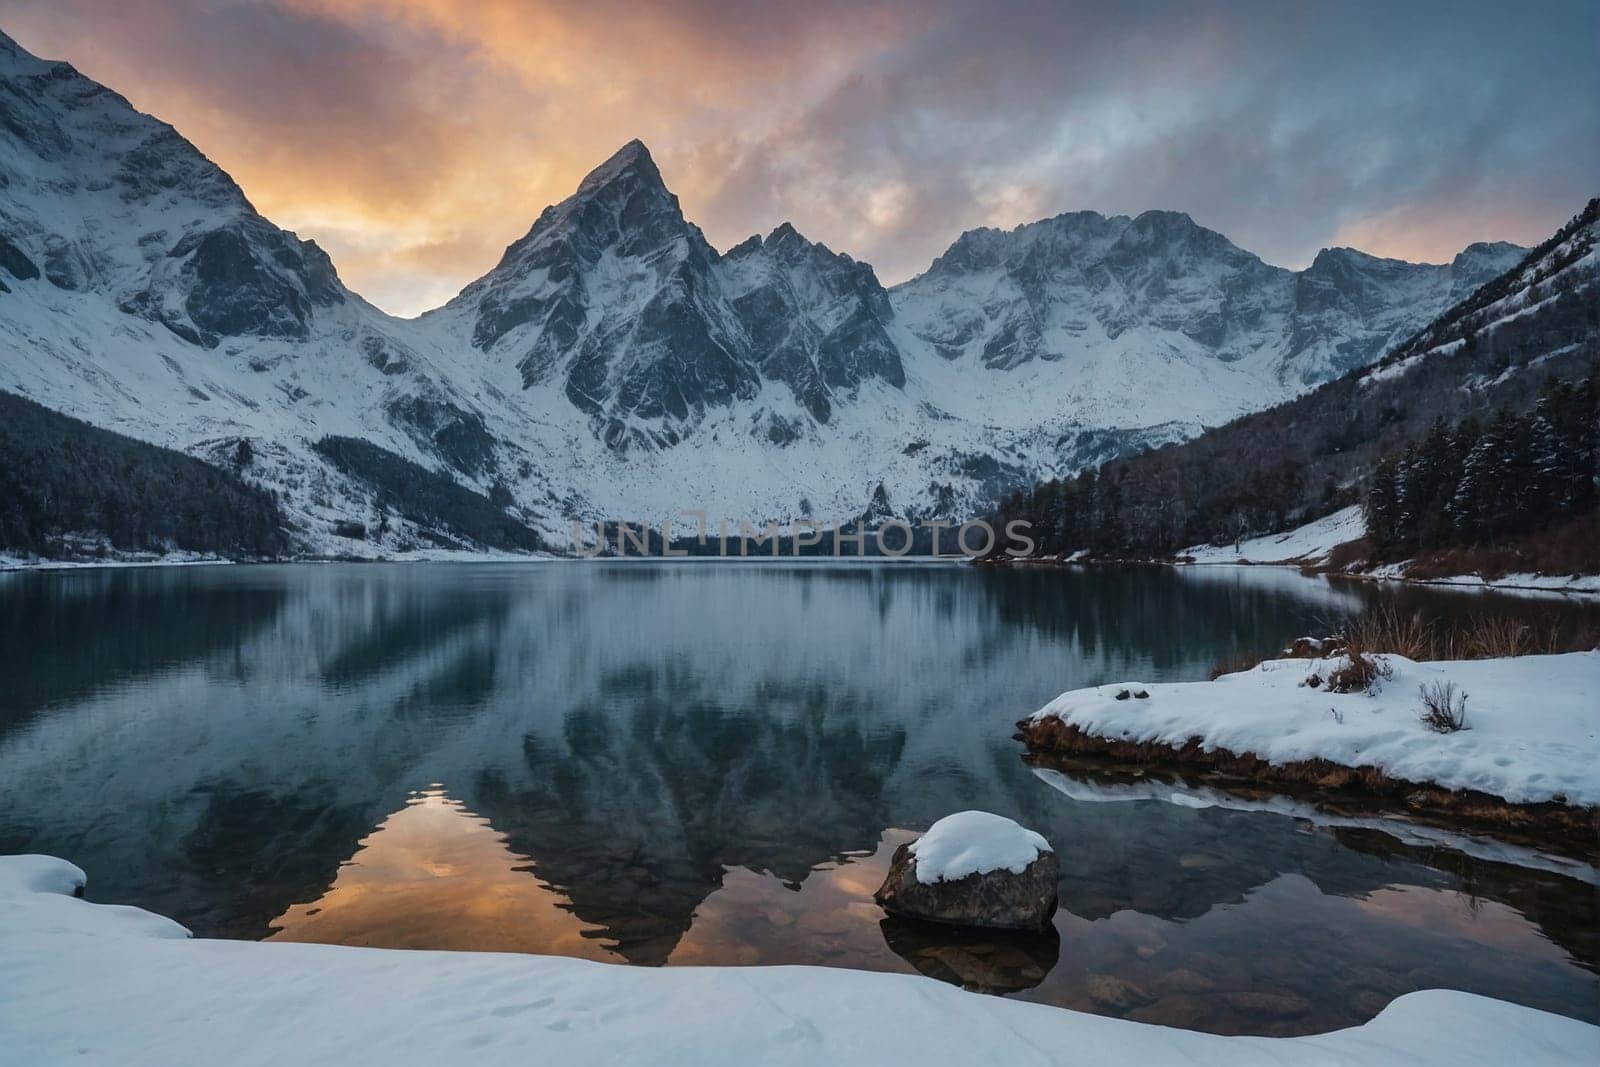 A lake sits nestled amidst towering snow-covered mountains, framed by a cloudy sky.